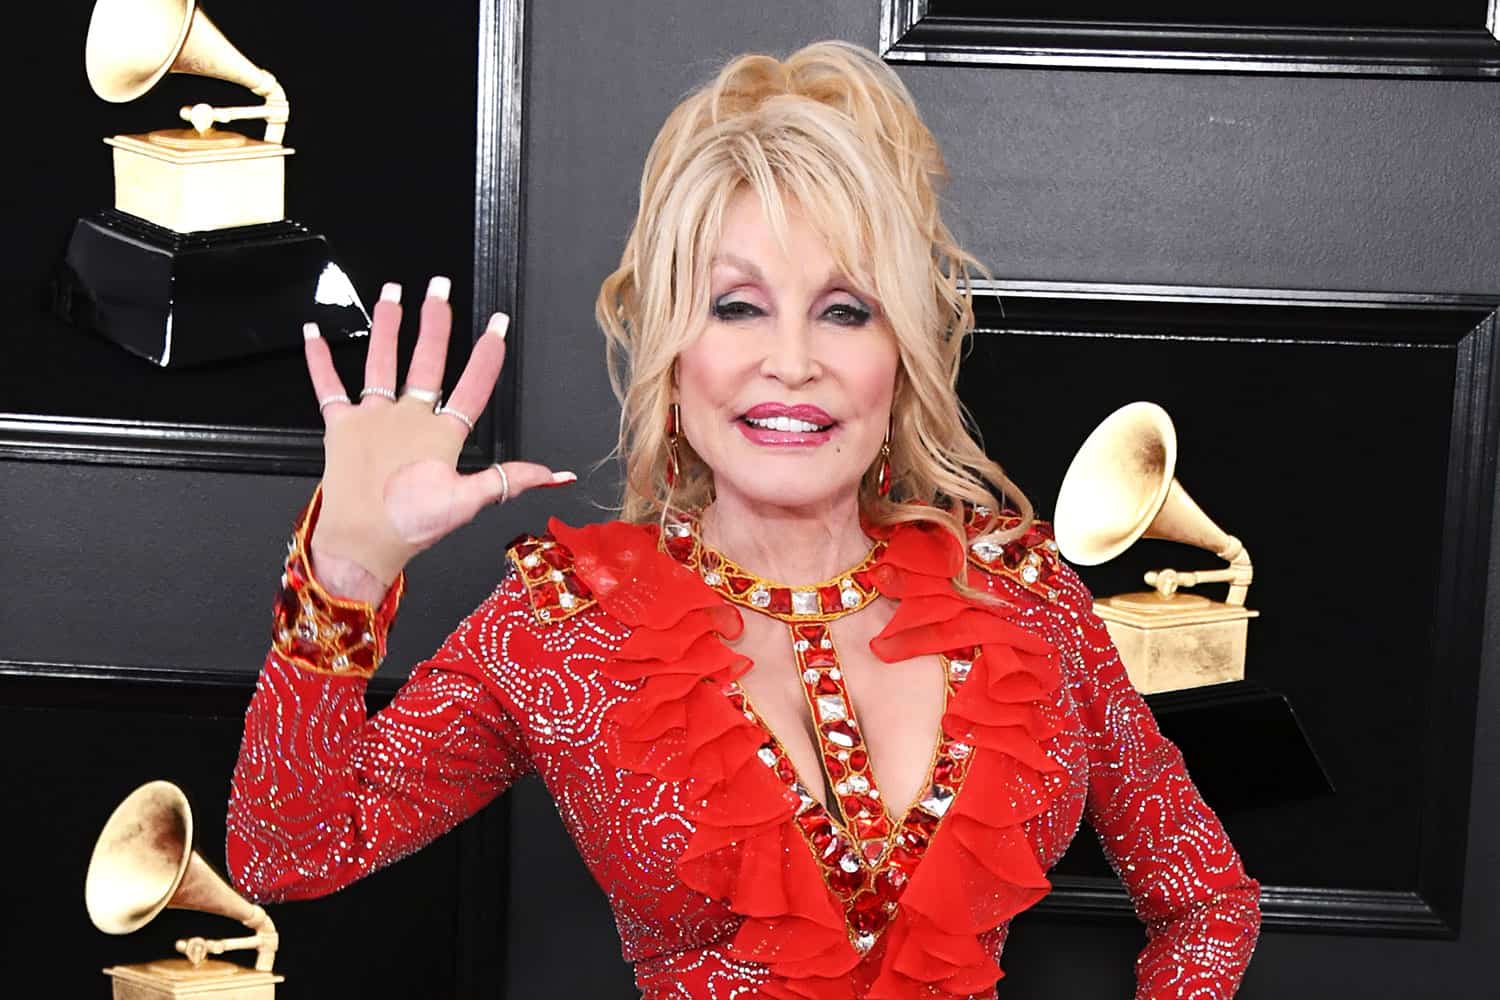 Dolly Parton Says She's Too Gaudy to Be a Fashion Icon